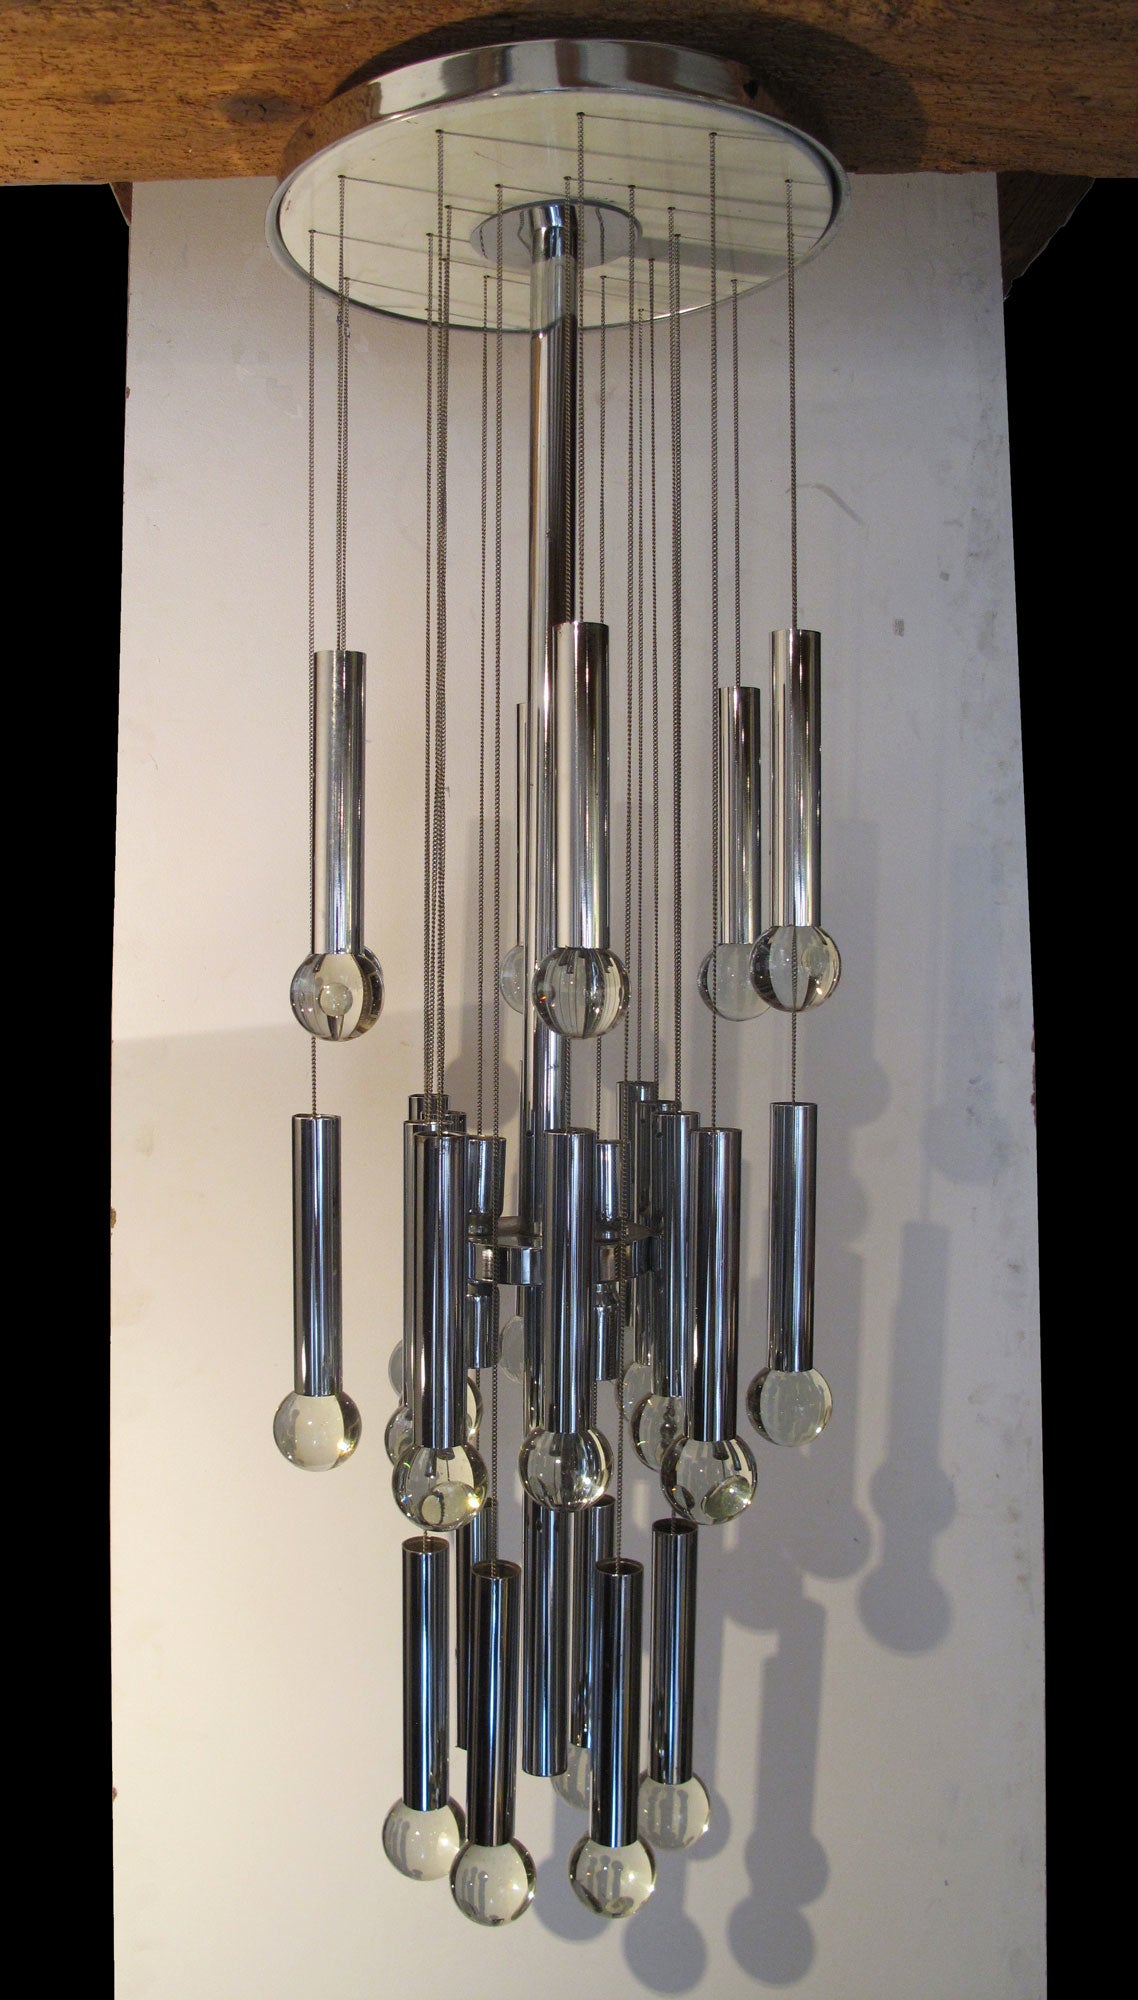 Gaetano Sciolari Chandelier

Materials and Techniques:	Chrome, Glass
Condition:	Excellent
Wear:	Wear consistent with age and use
Height:	44 in. (112 cm)
Diameter:	15 in. (38 cm)